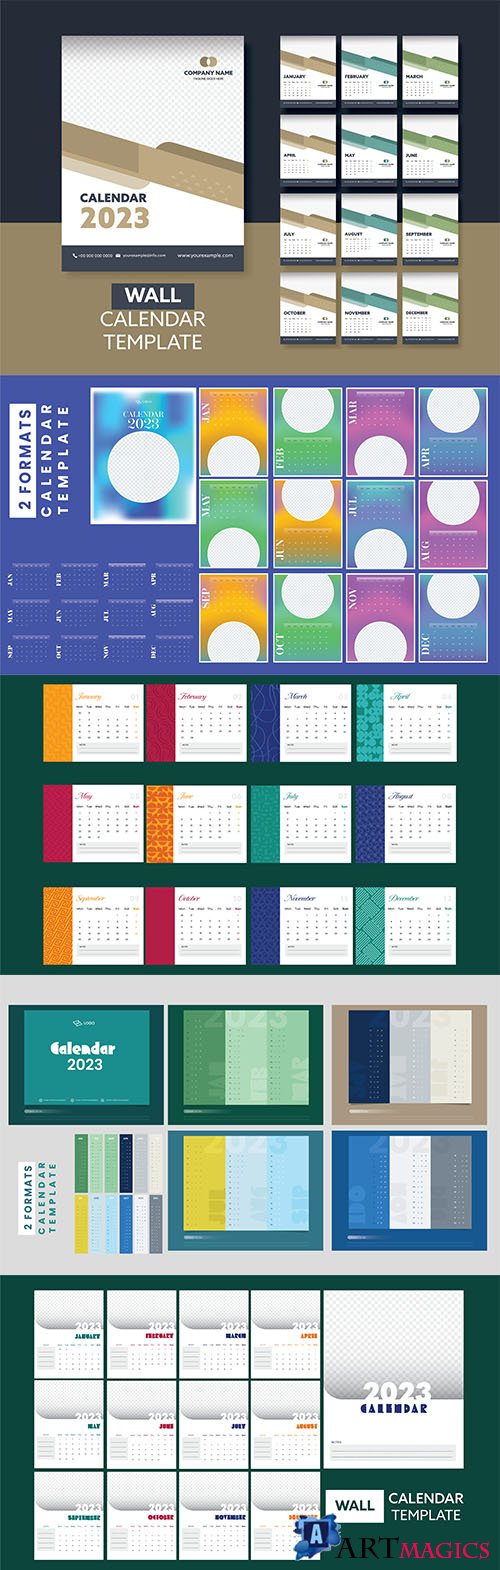 Calendar 2023 colorful design template for happy new year